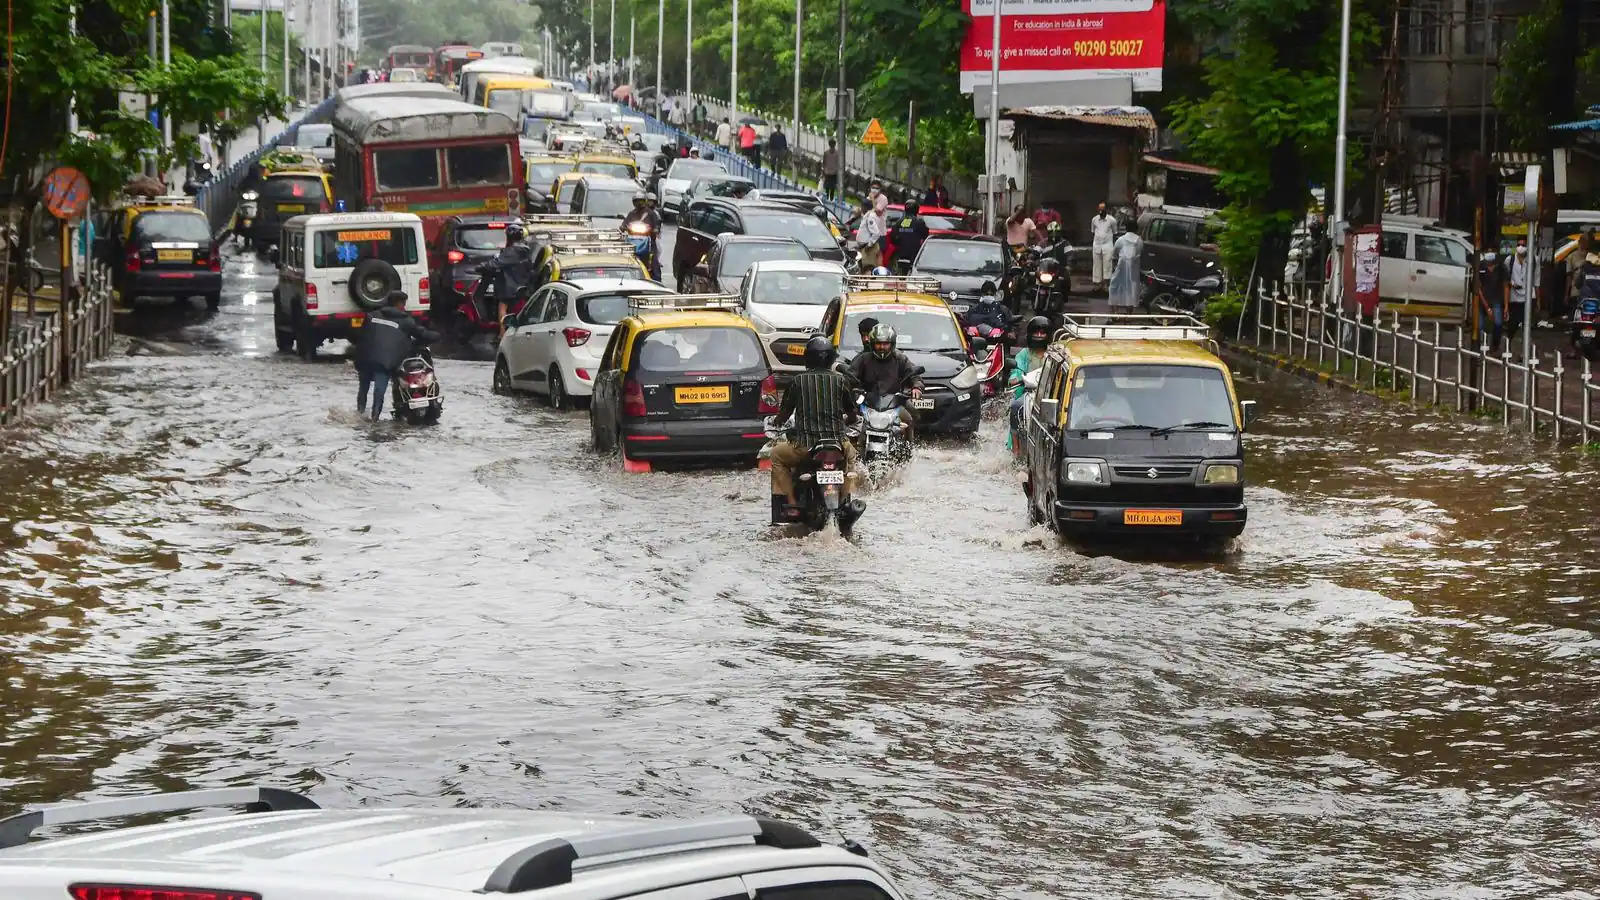 All over Telangana, heavy rains continue to interfere with daily living.